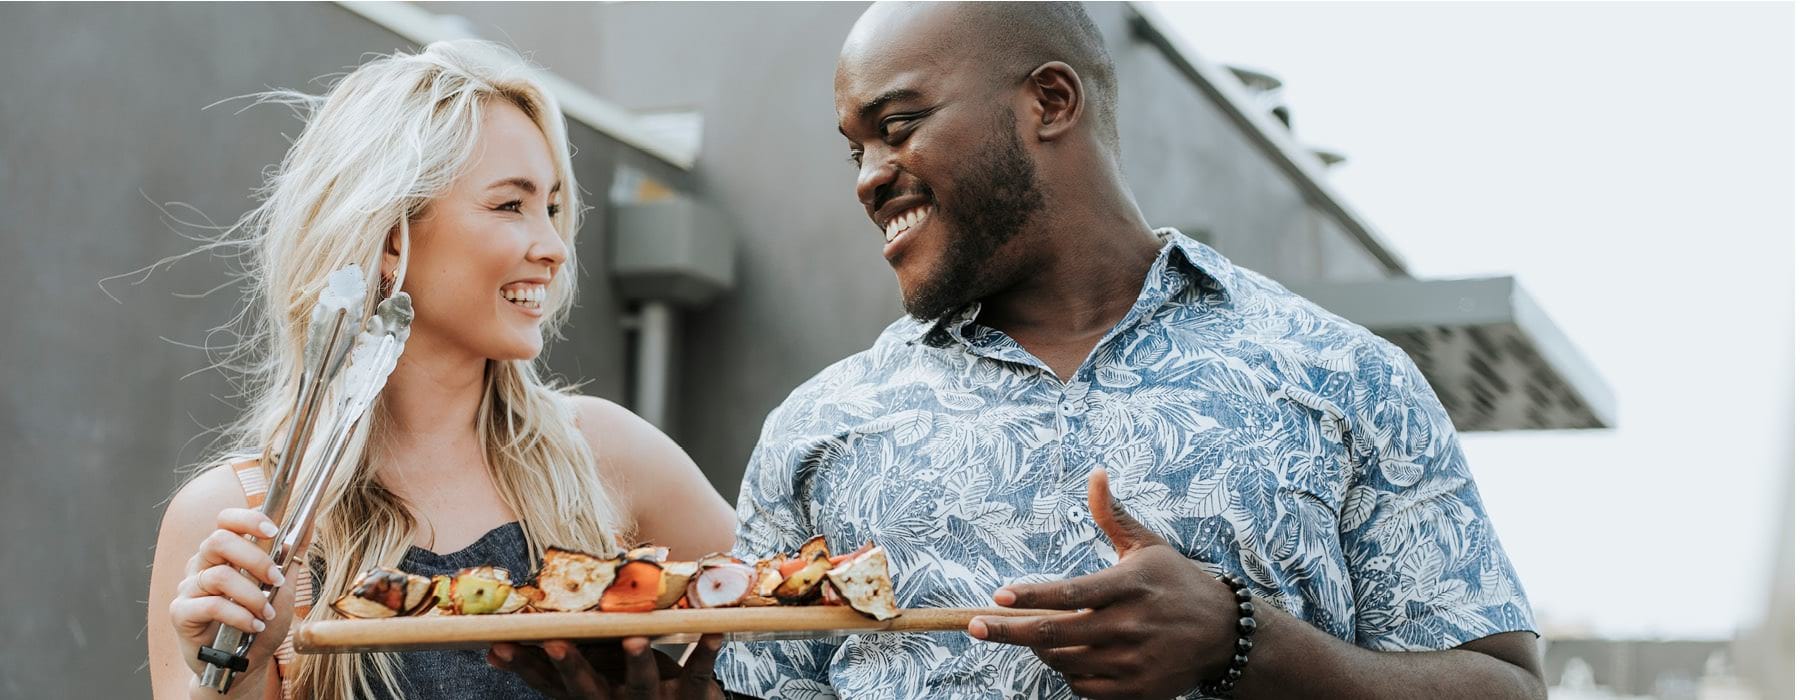 man and woman smile at each other while holding a cutting board of kabobs and grilling tongs